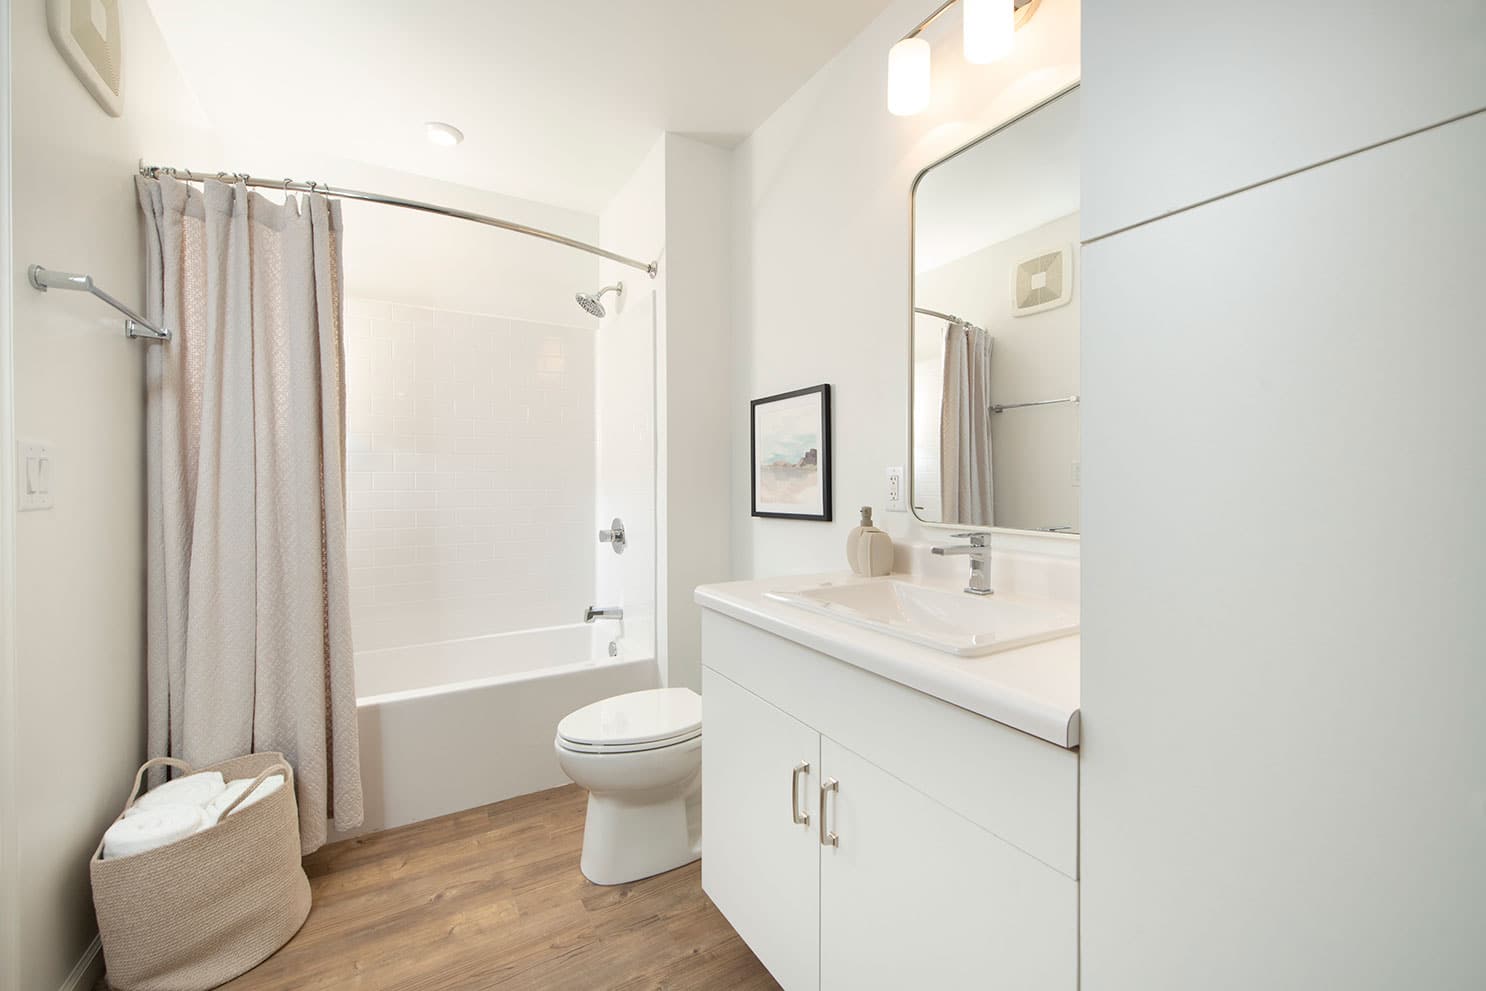 Bright bathroom with a white vanity, bathtub with a shower, and a basket of fresh towels on the wooden floor.